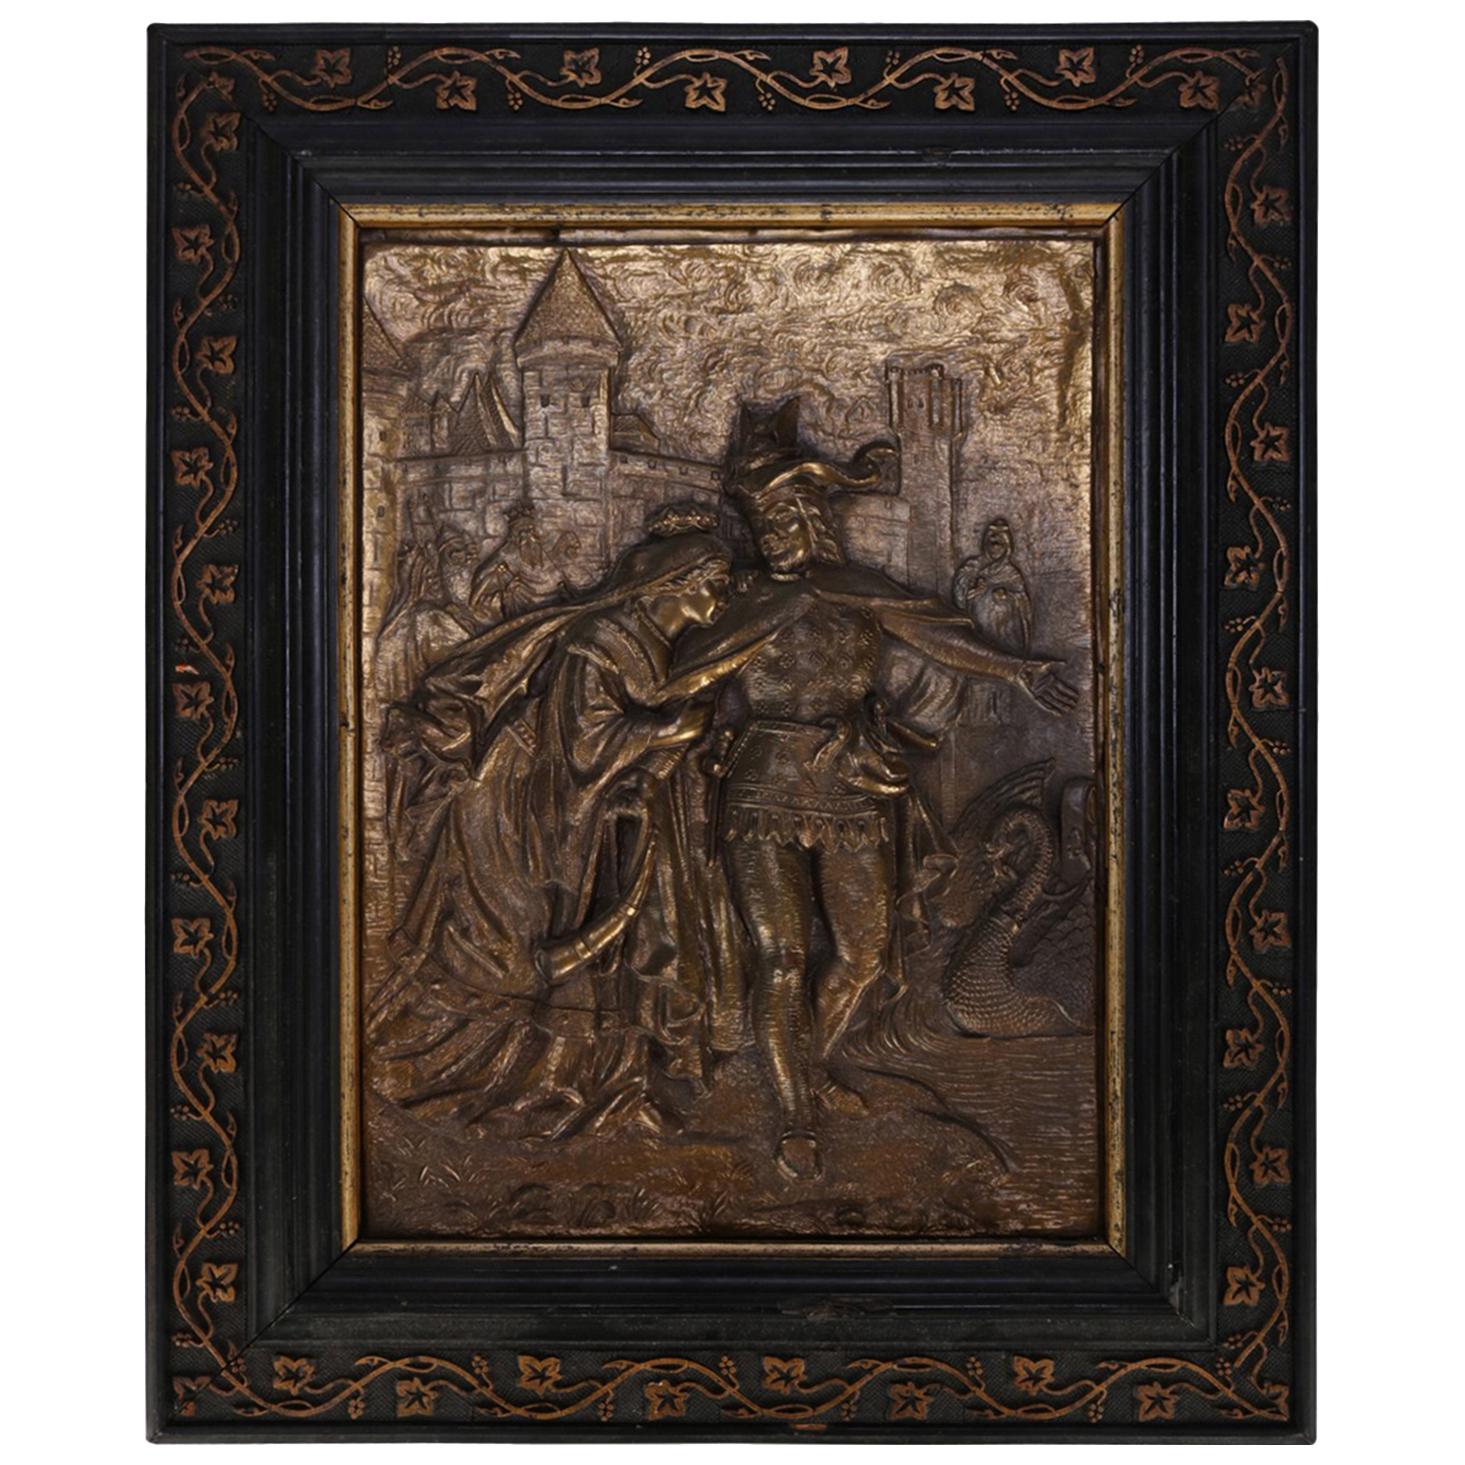 Antique French Embossed Bronze Courting Plaque in Gilt and Ebonized Frame